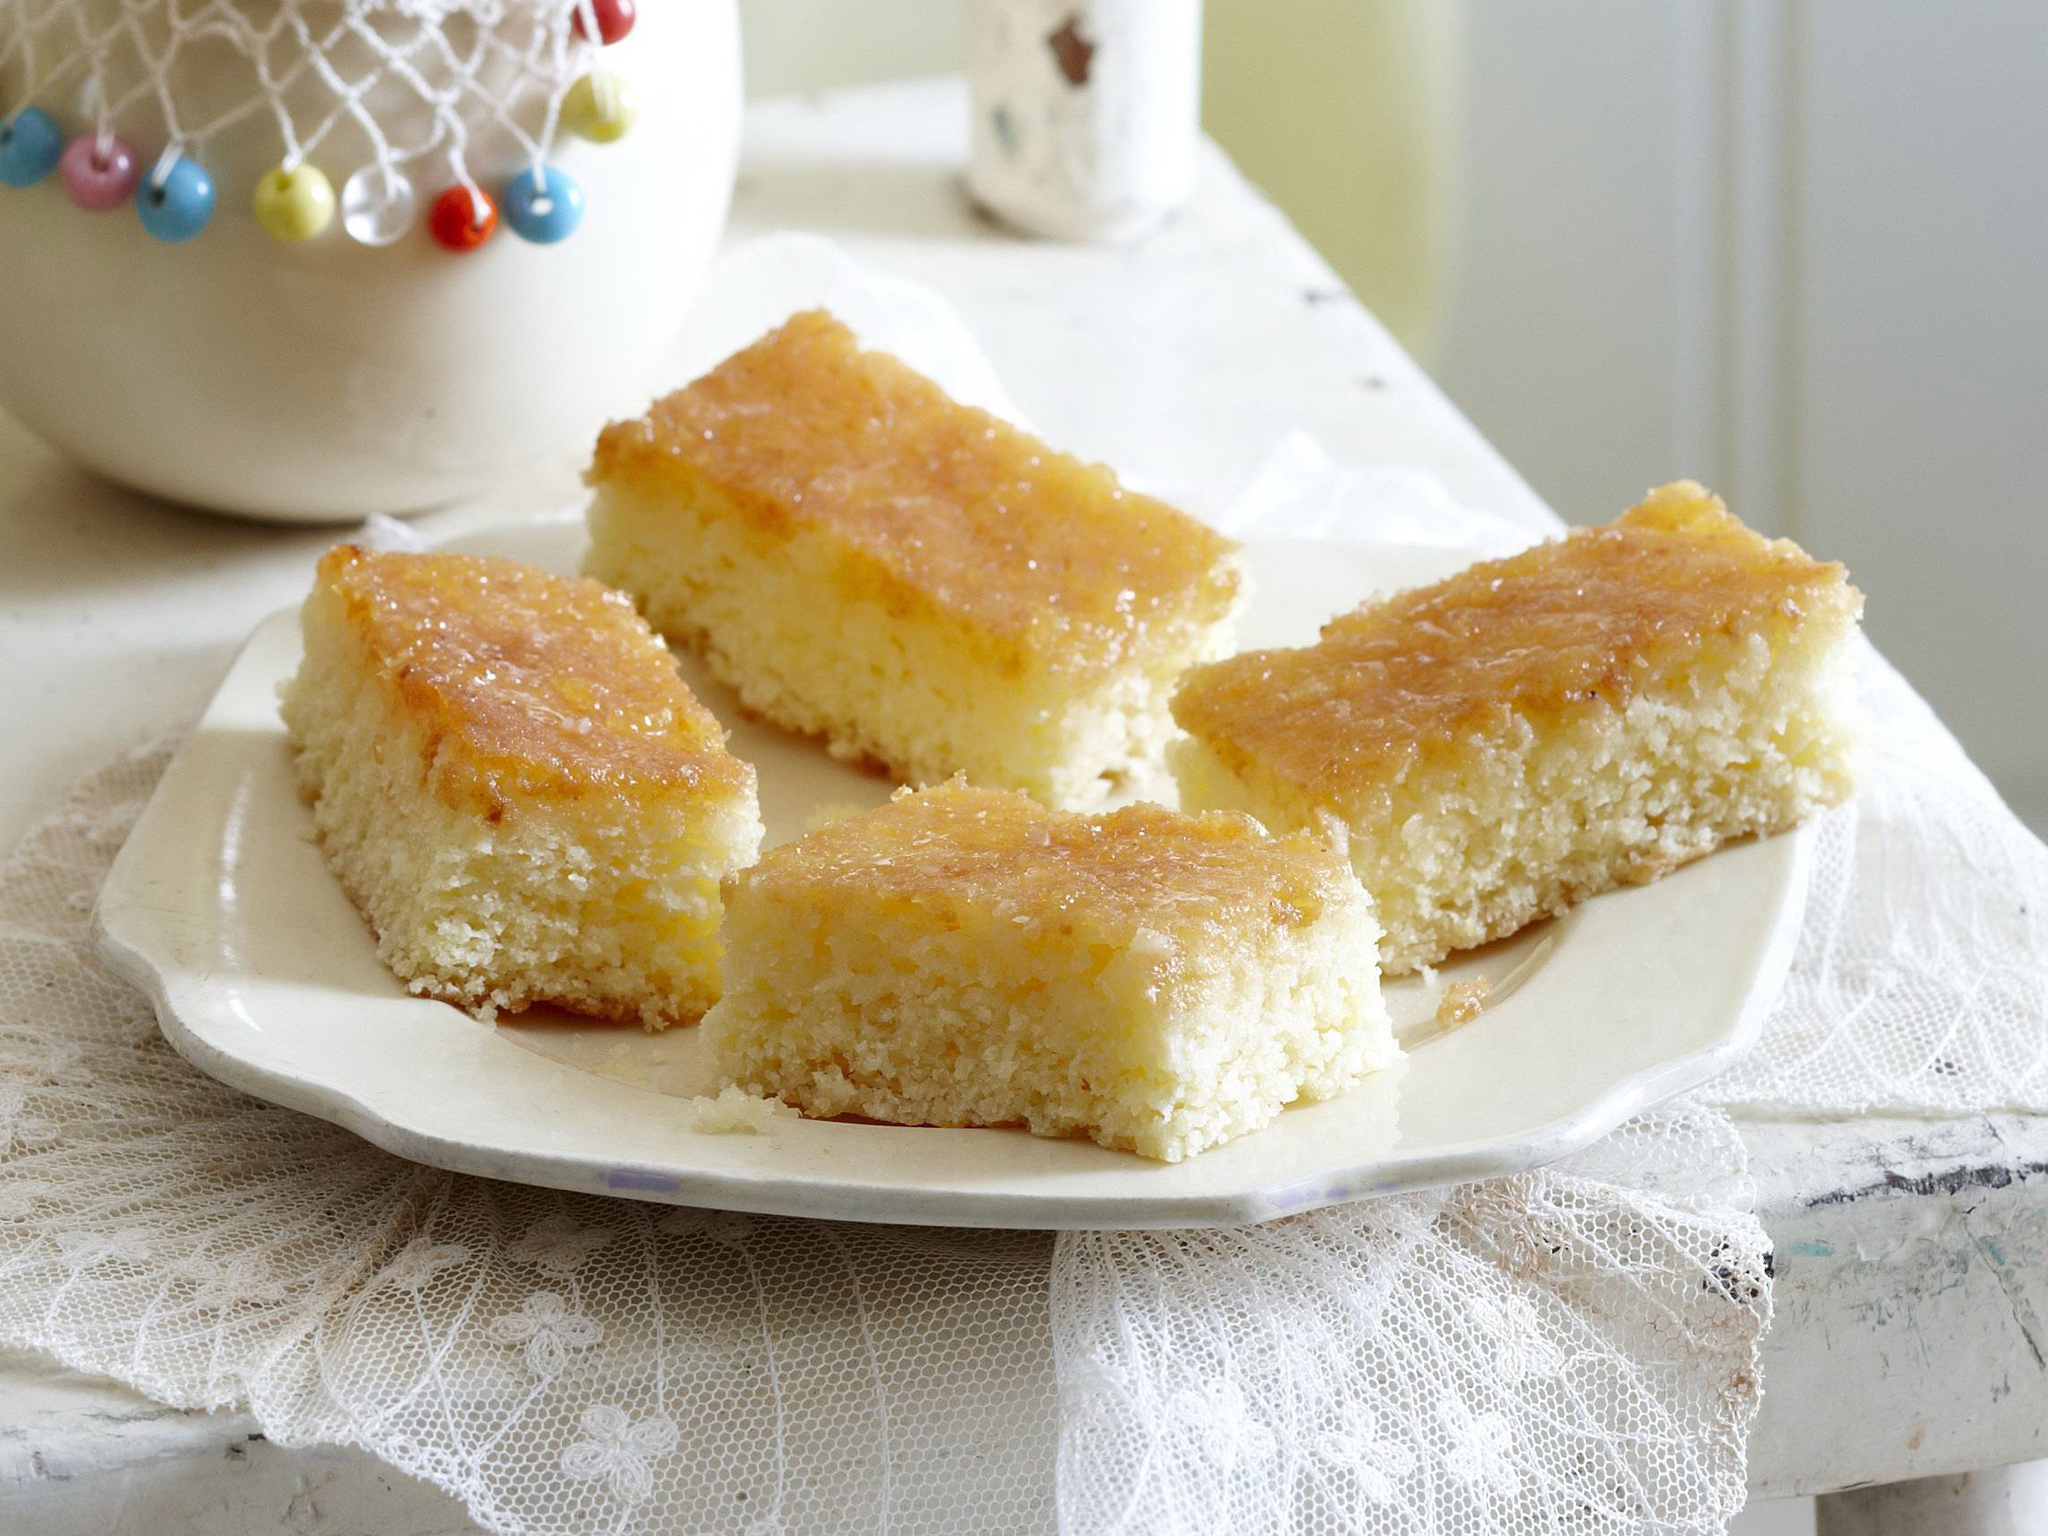 coconut slice with lemon syrup